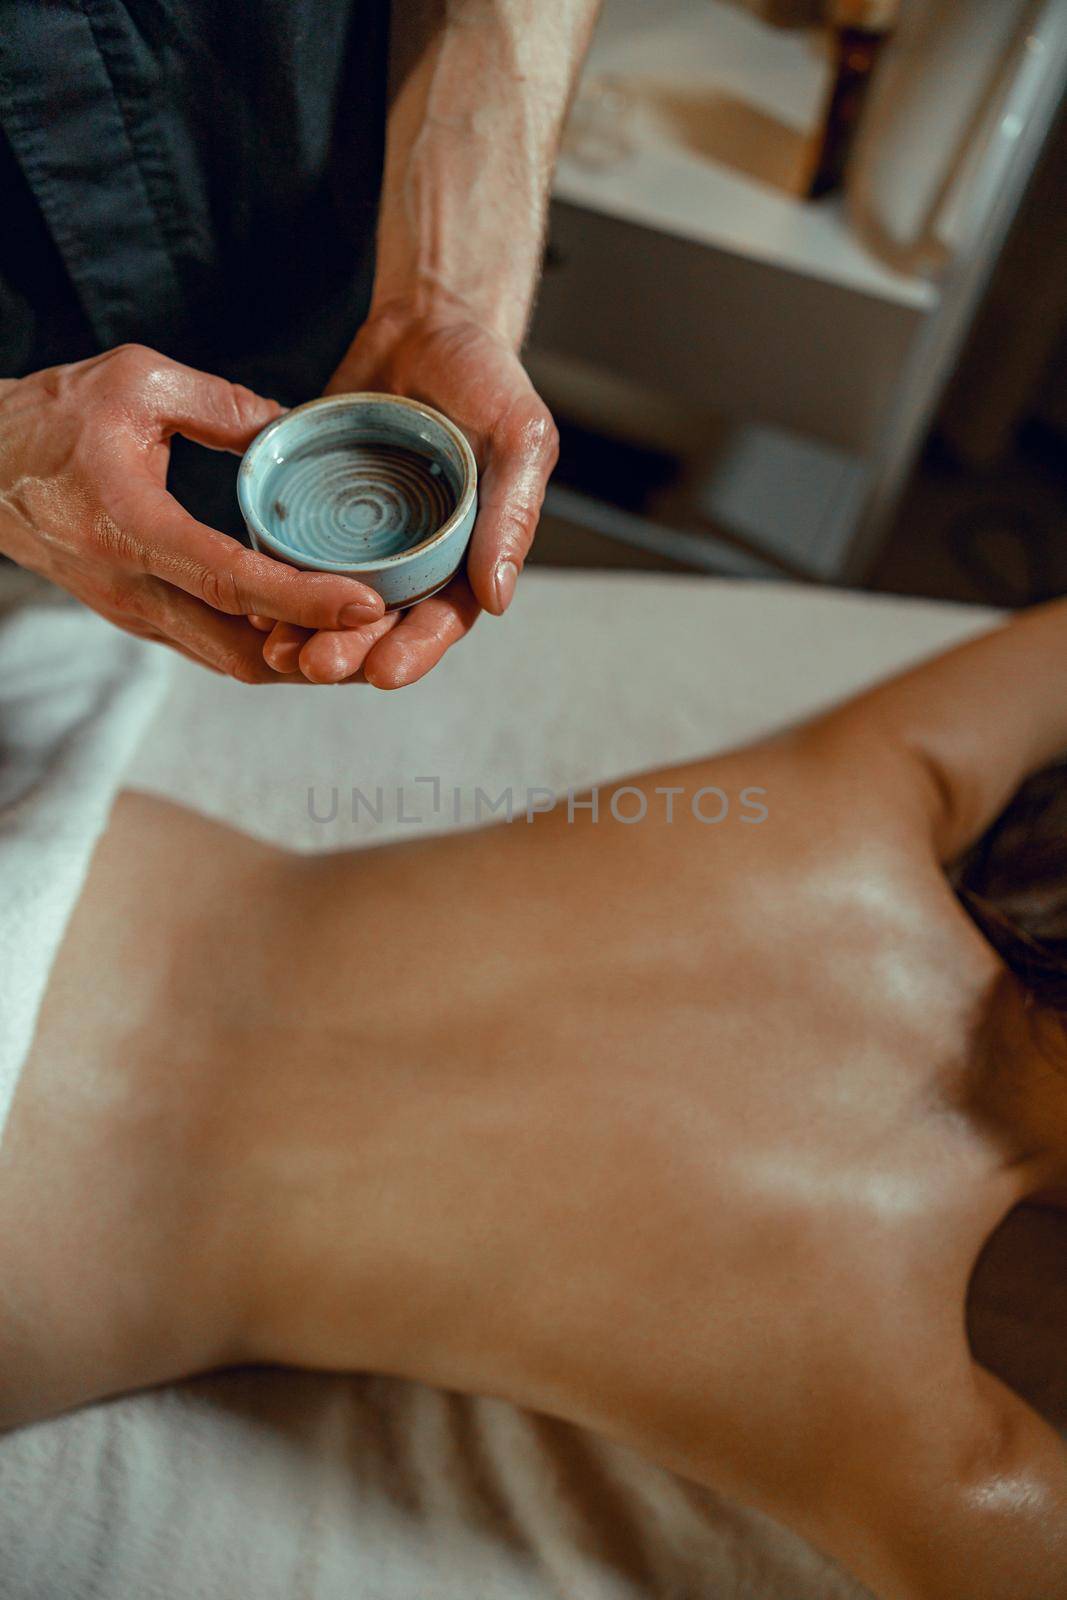 A bowl with warm herb infused oil for back massage in hands of male therapist by Yaroslav_astakhov